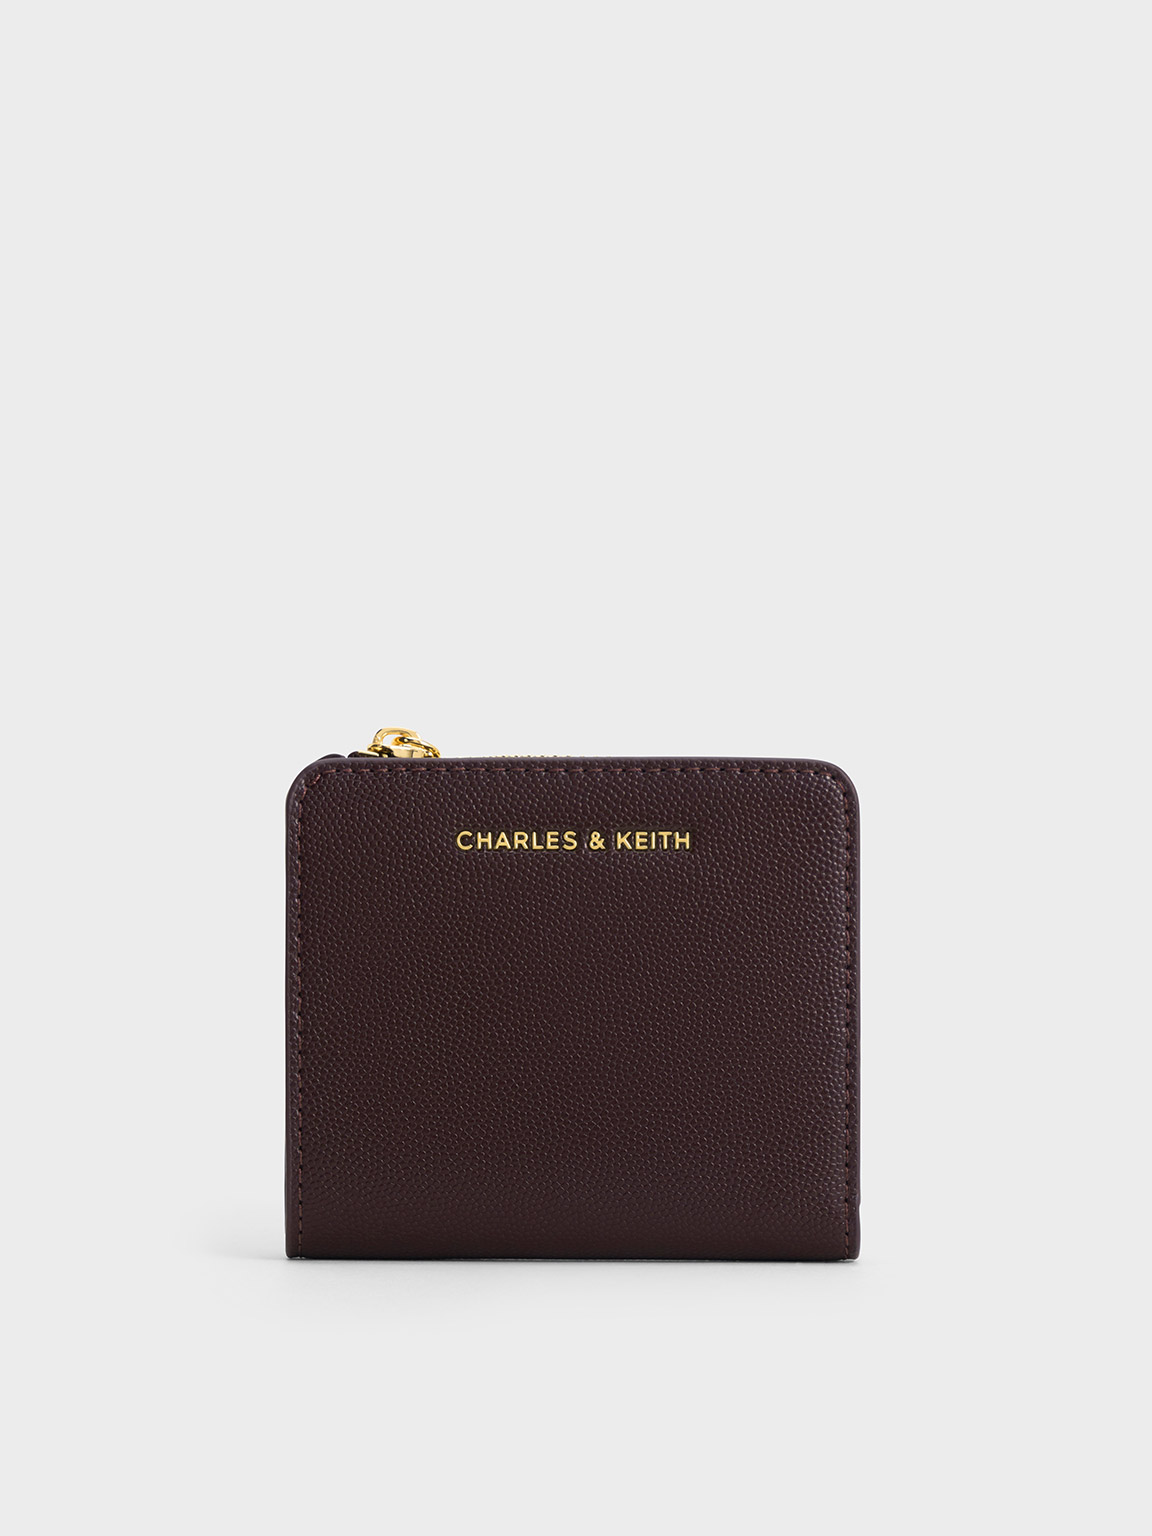 Plum Top Zip Small Wallet - CHARLES & KEITH TH